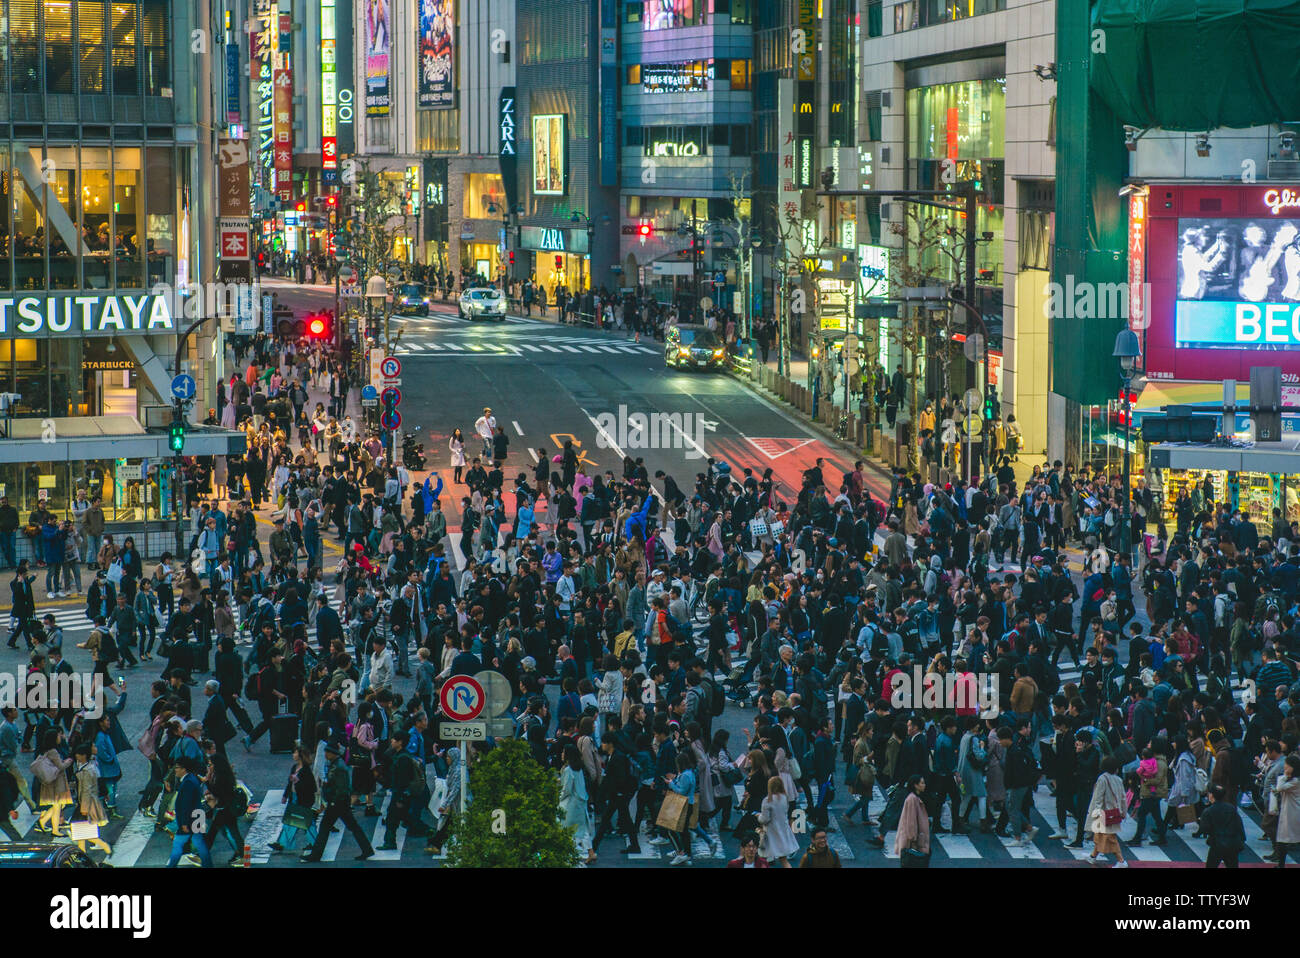 Tokyo, Japan - April 5, 2018: Shibuya Crossing, a world famous and iconic intersection in Shibuya, Tokyo. Hundreds of people from all directions at on Stock Photo